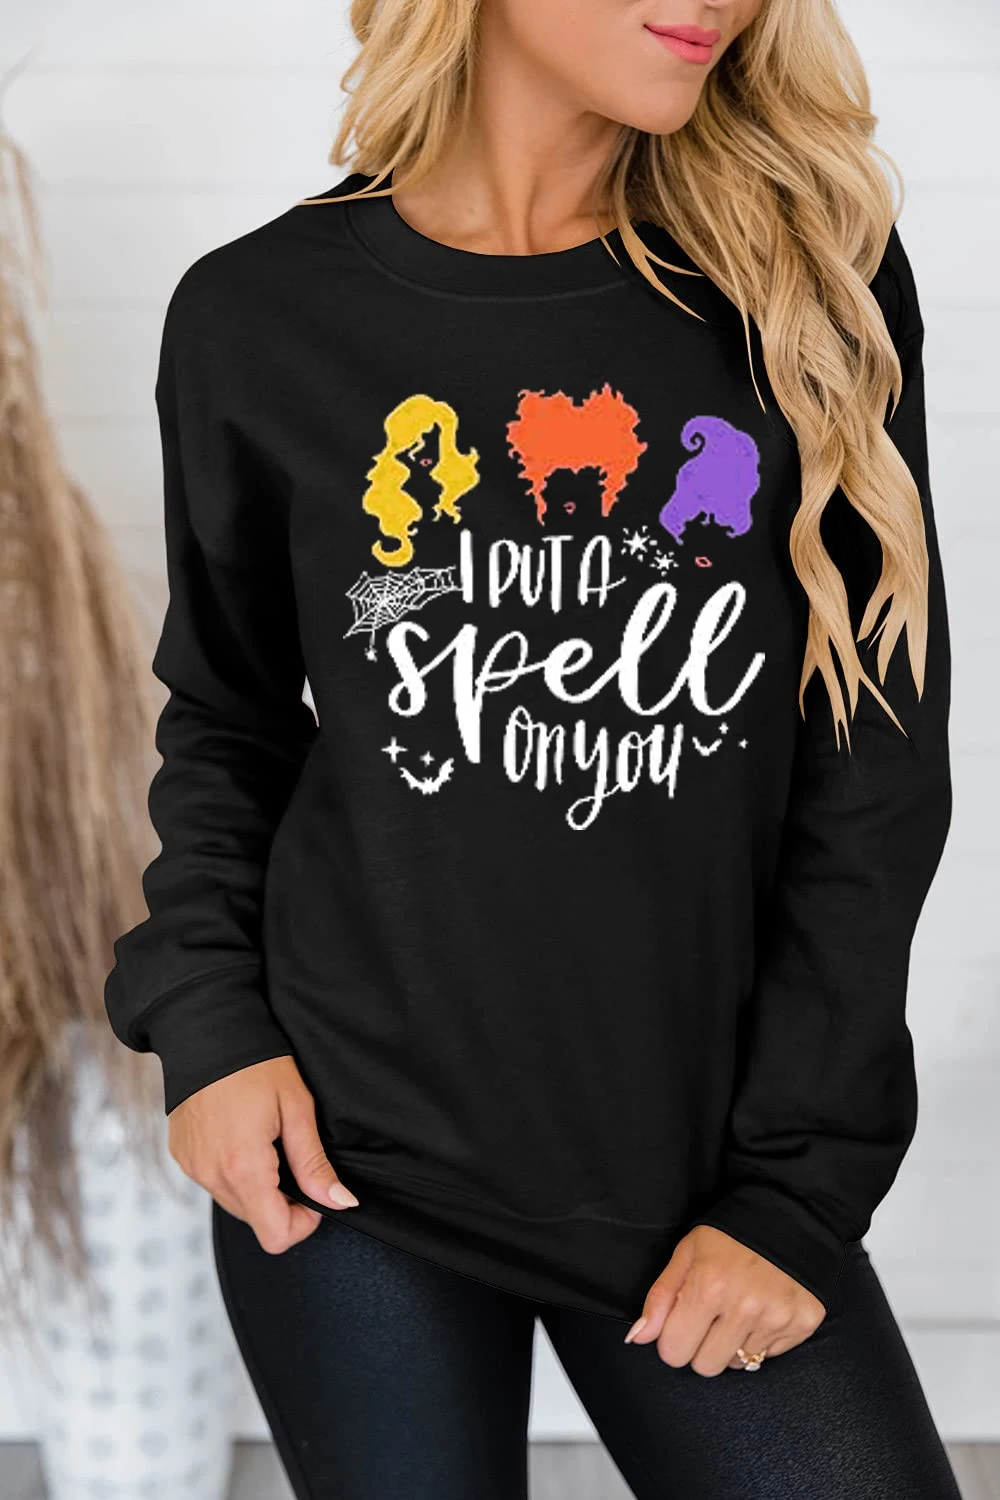 

Women's printed jumper, slightly stretchy - casual and comfortable long-sleeved sweatshirt